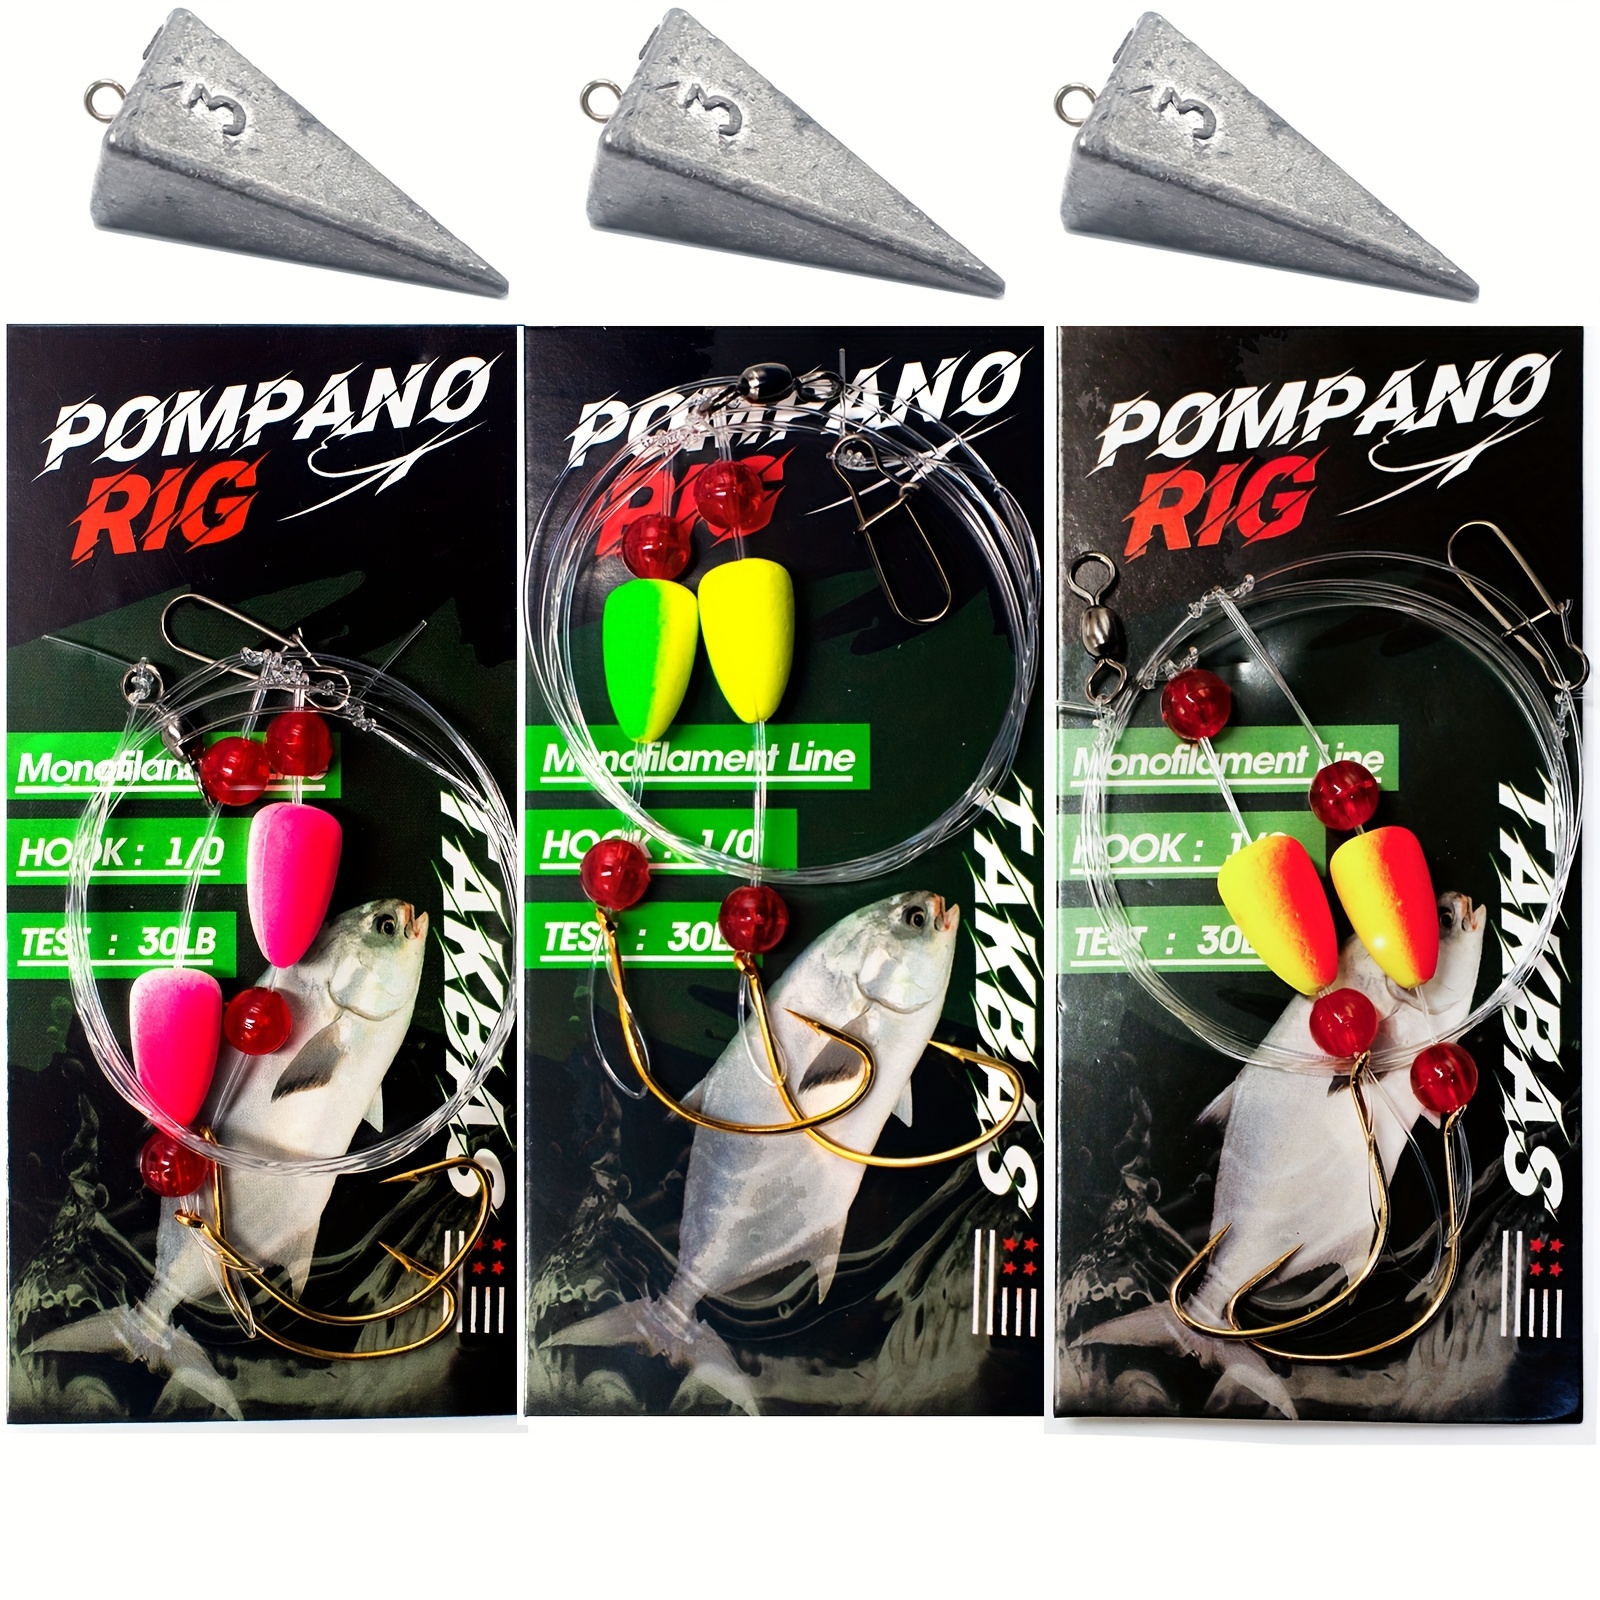 OROOTL Surf Fishing Pompano Rigs, 6pcs Surf Fishing Rigs Pre-Tied Saltwater  Pompano Rigs with Floats Hooks Swivel Snap Beads Saltwater Fishing Gear